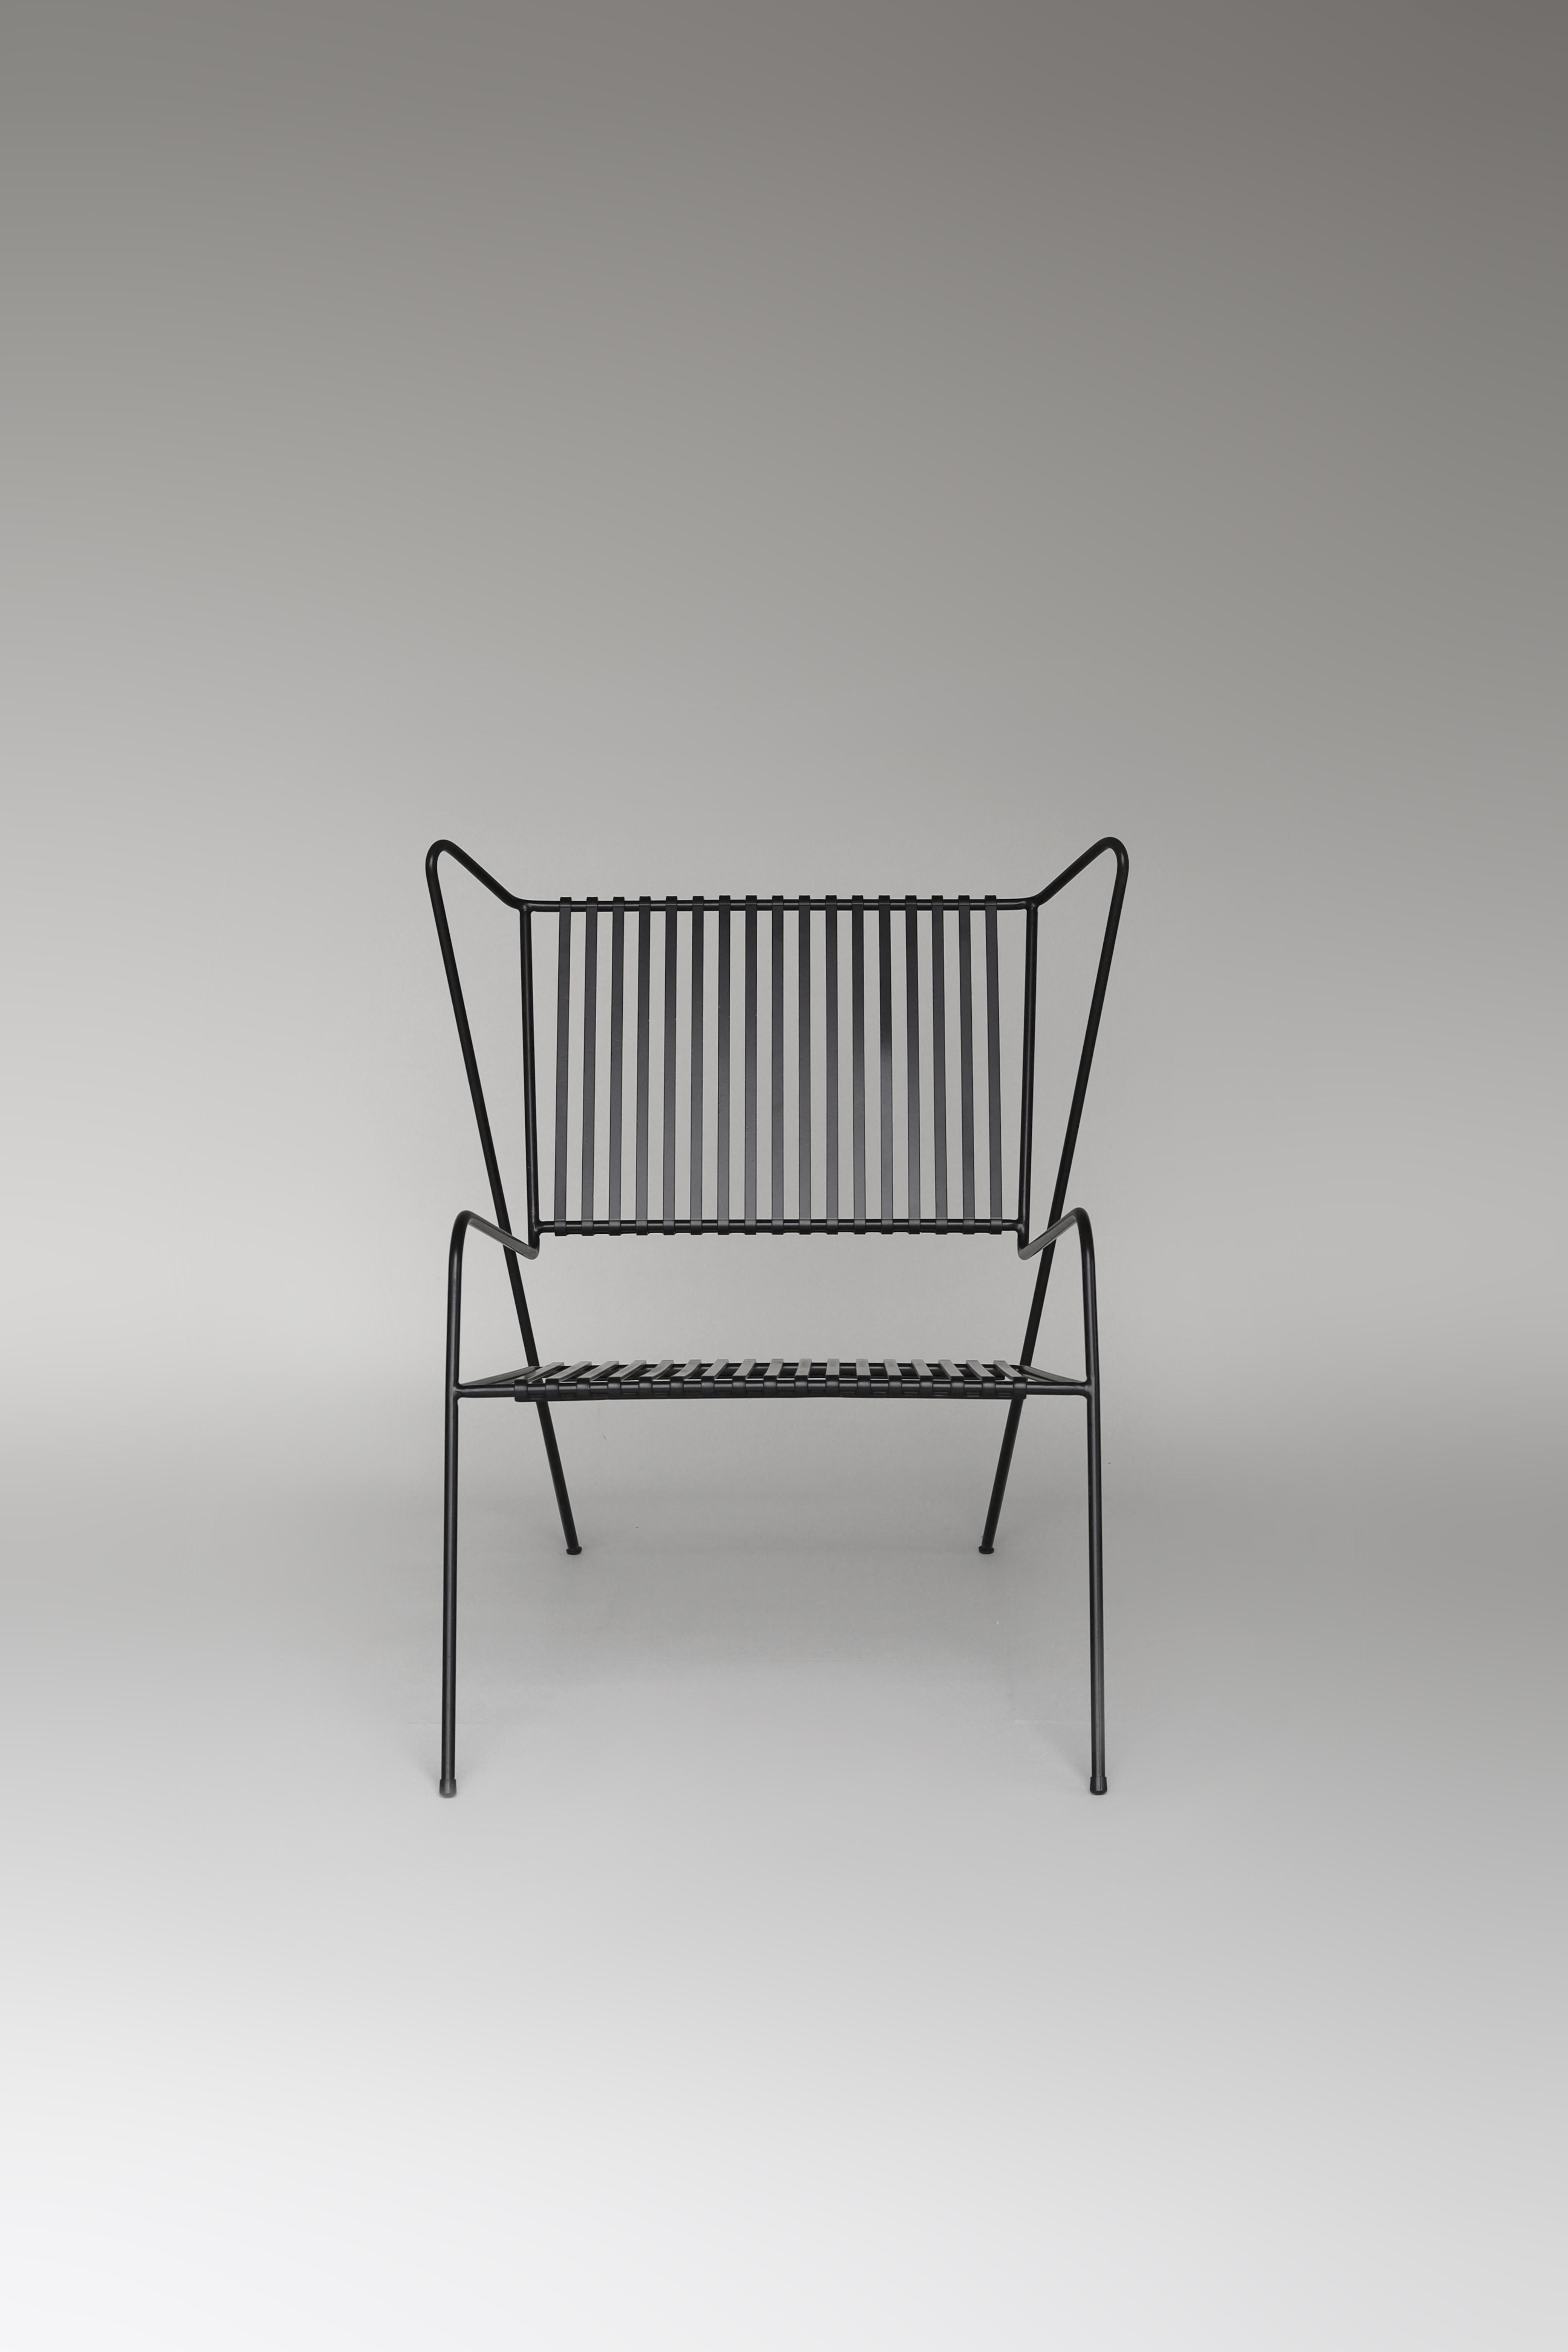 Black Capri easy lounge chair by Cools Collection
Materials: Powder coated stainless steel.
Dimensions: W 70 x D 84 x H 78 cm (seat height 34cm).
Available in white or black finishes.

COOLS Collection was launched in 2020 by